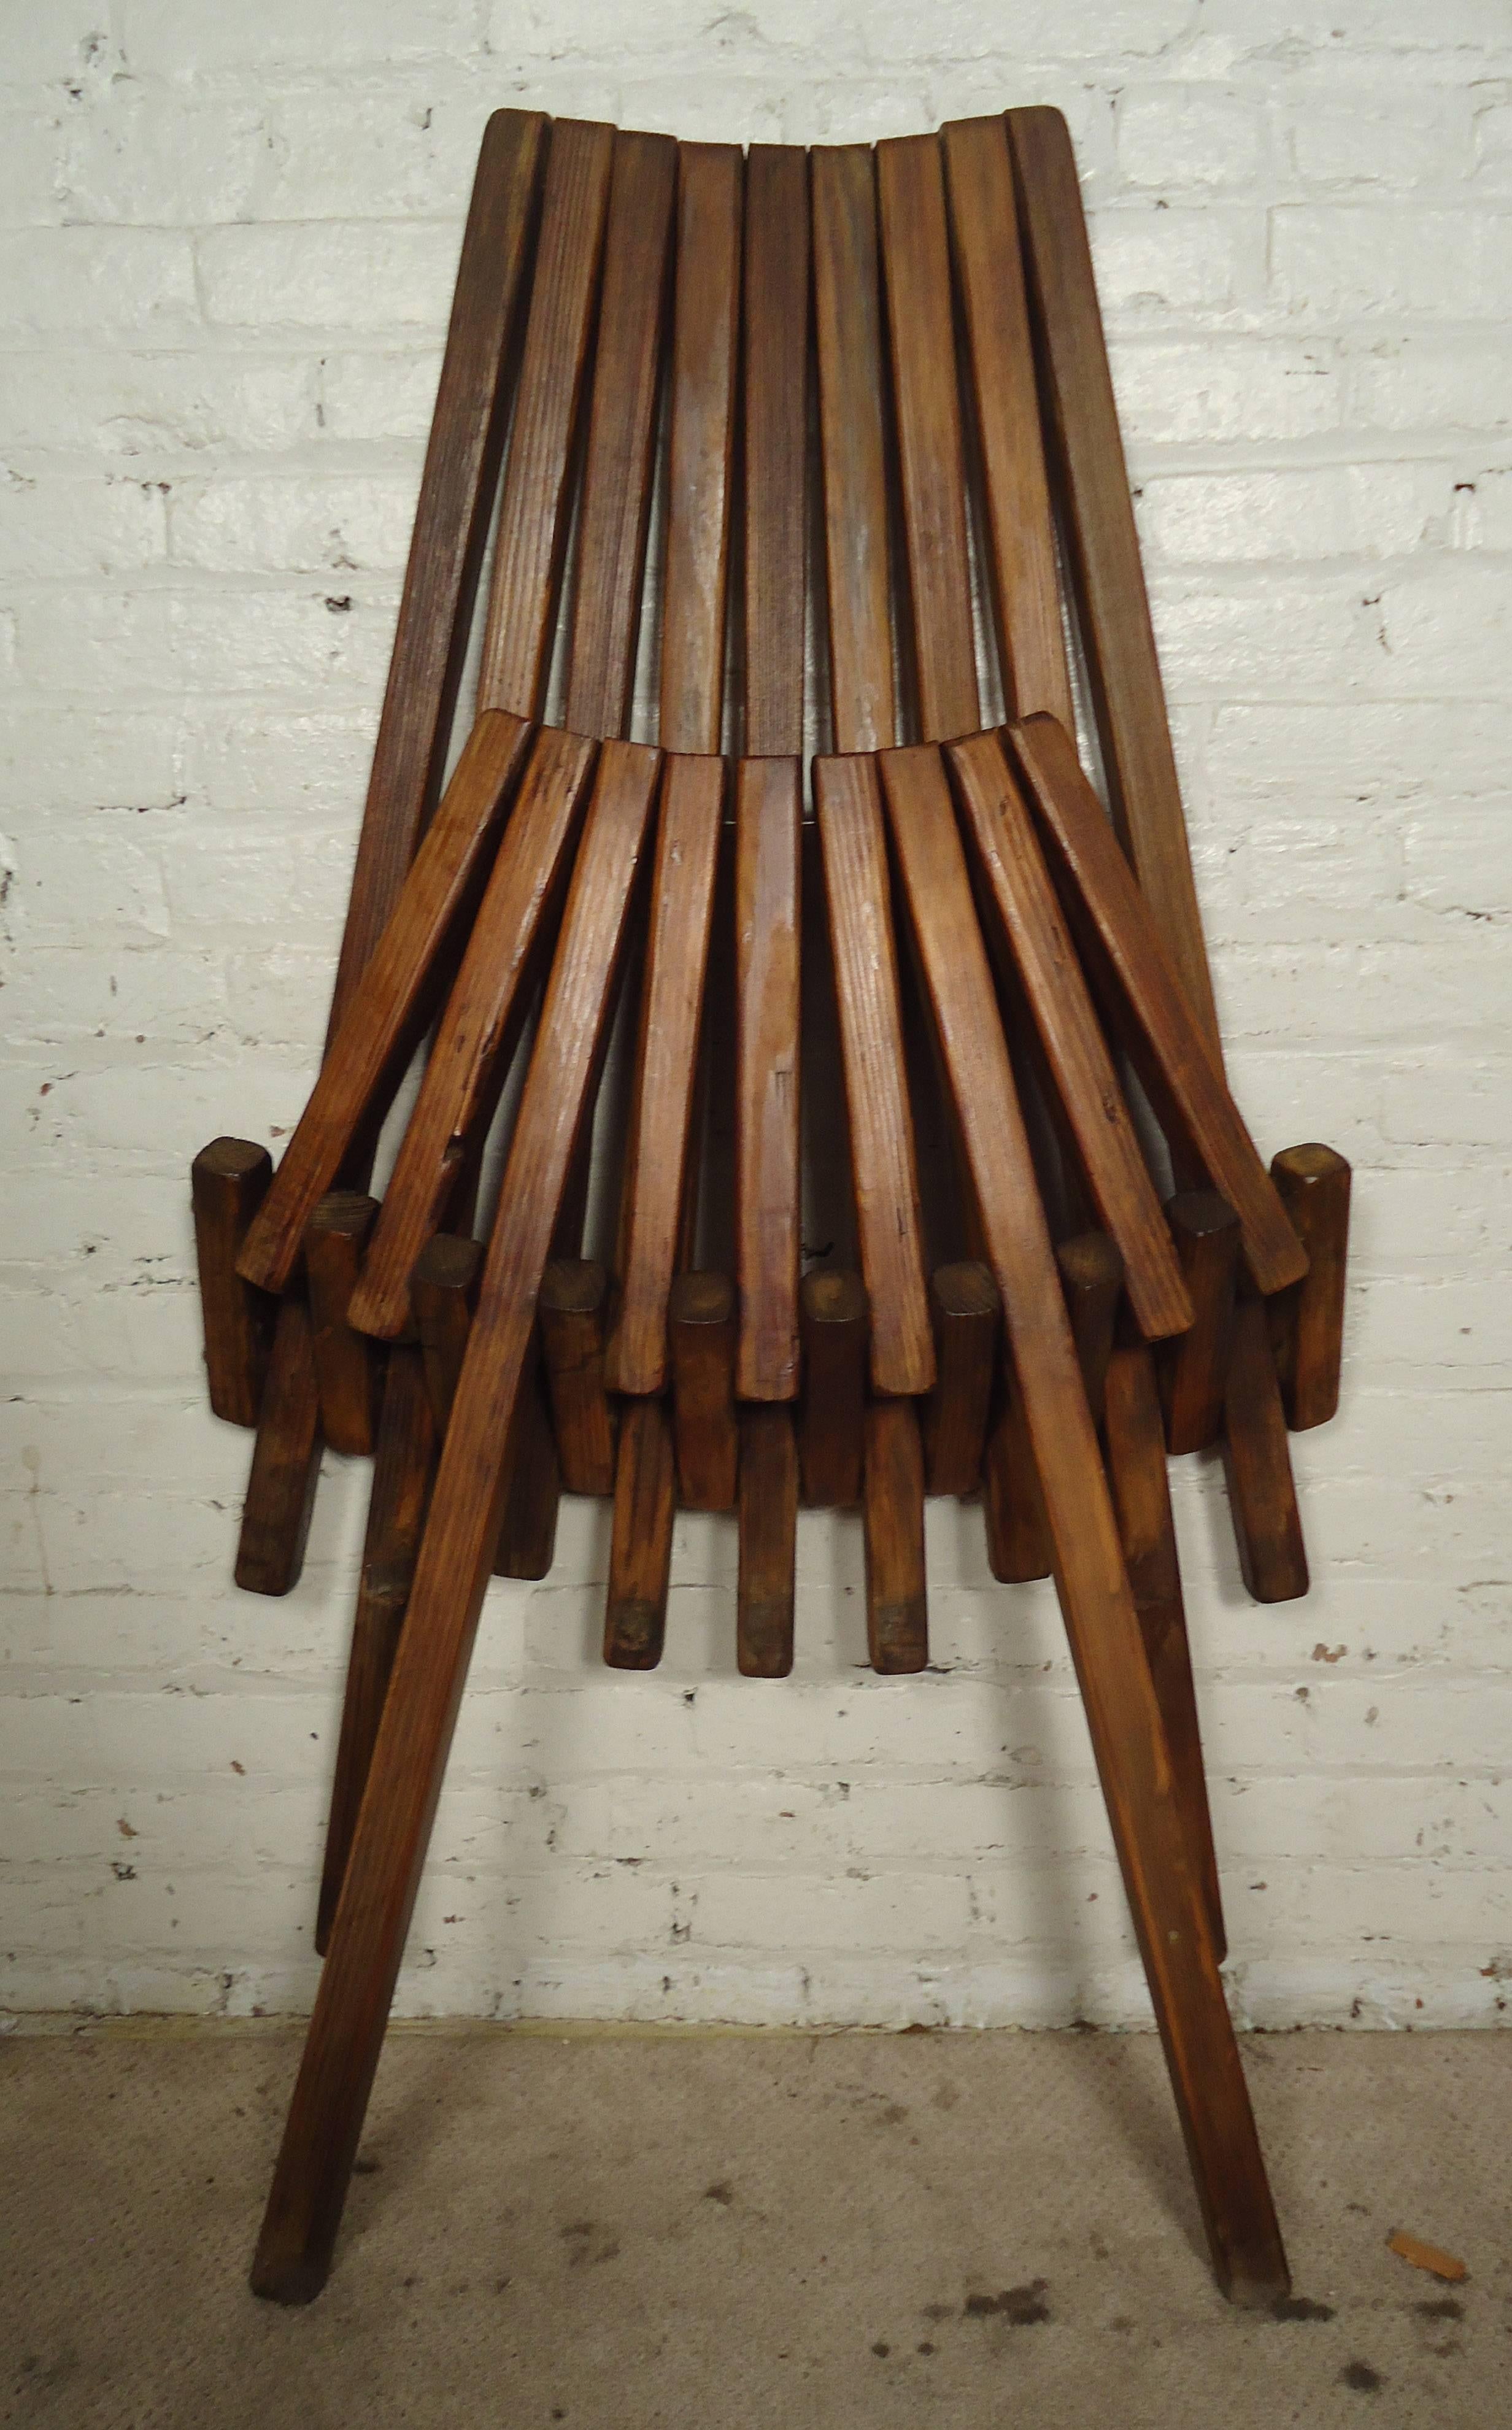 Vintage-modern indoor or outdoor slatted wooden chair, recently re-finished, folds conveniently for space saving.

Please confirm item location NY or NJ with dealer.